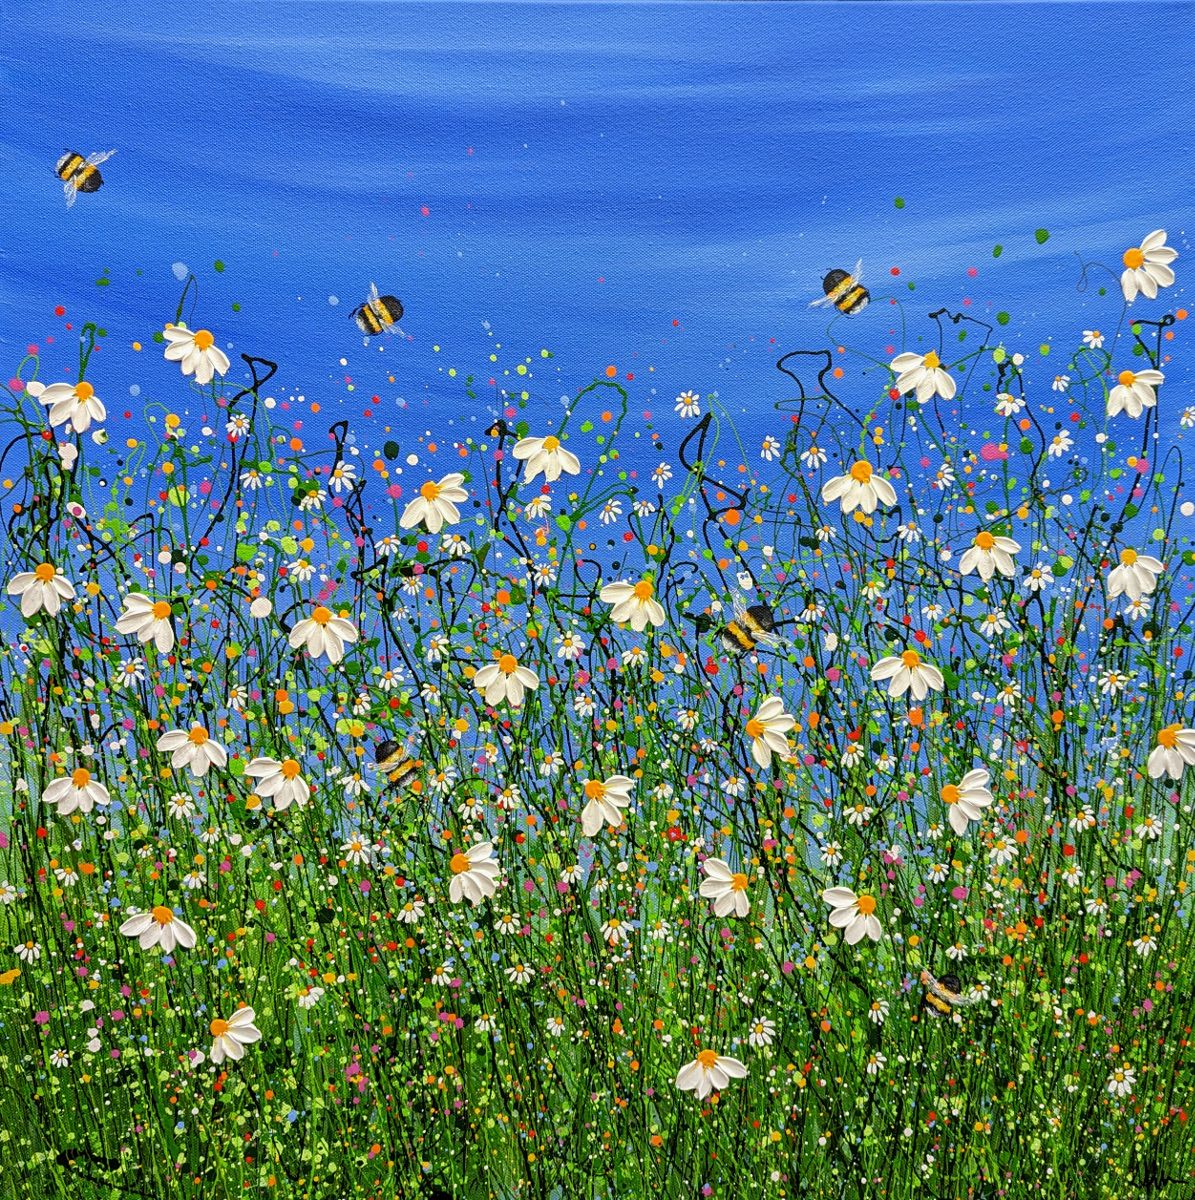 Bee utiful Daisy Meadow #3 By Lucy Moore by Lucy Moore